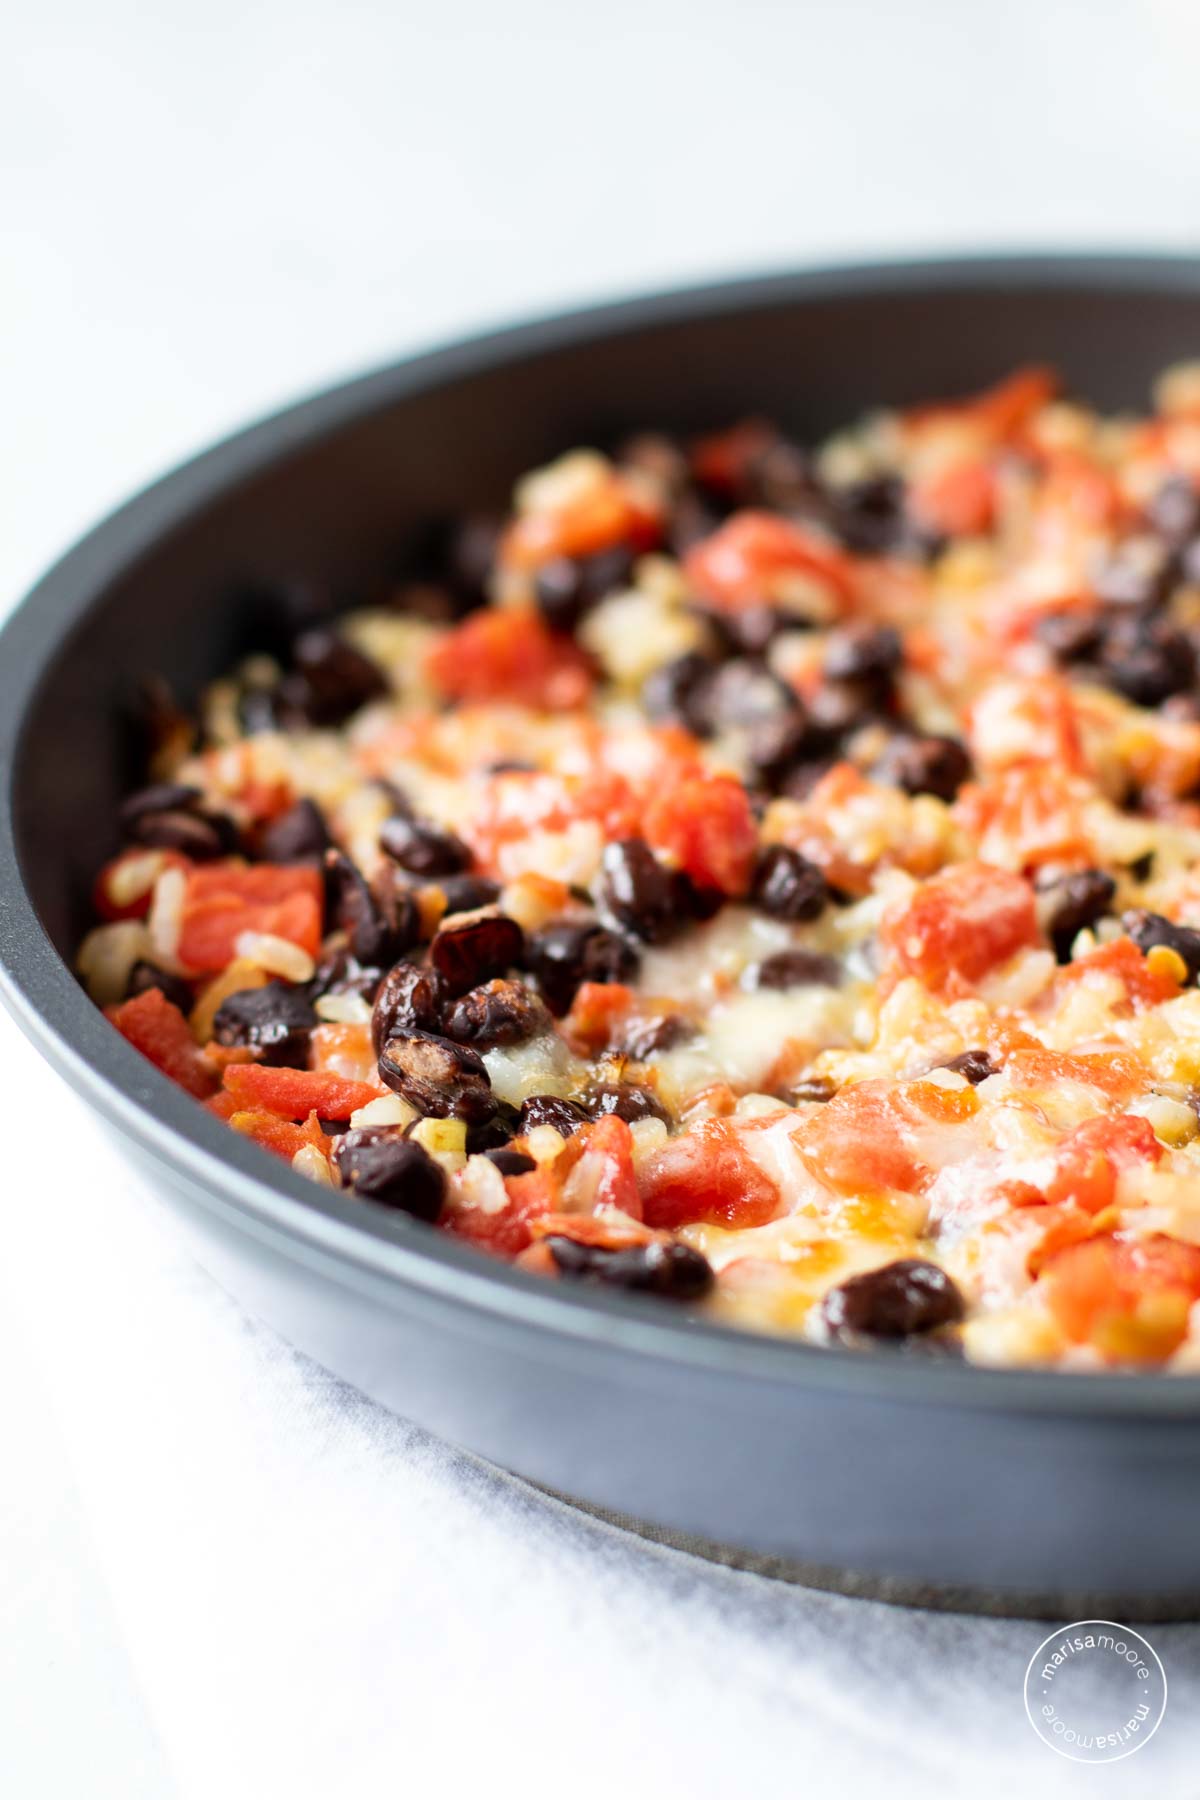 Skillet with black beans, tomatoes, rice and melted cheese